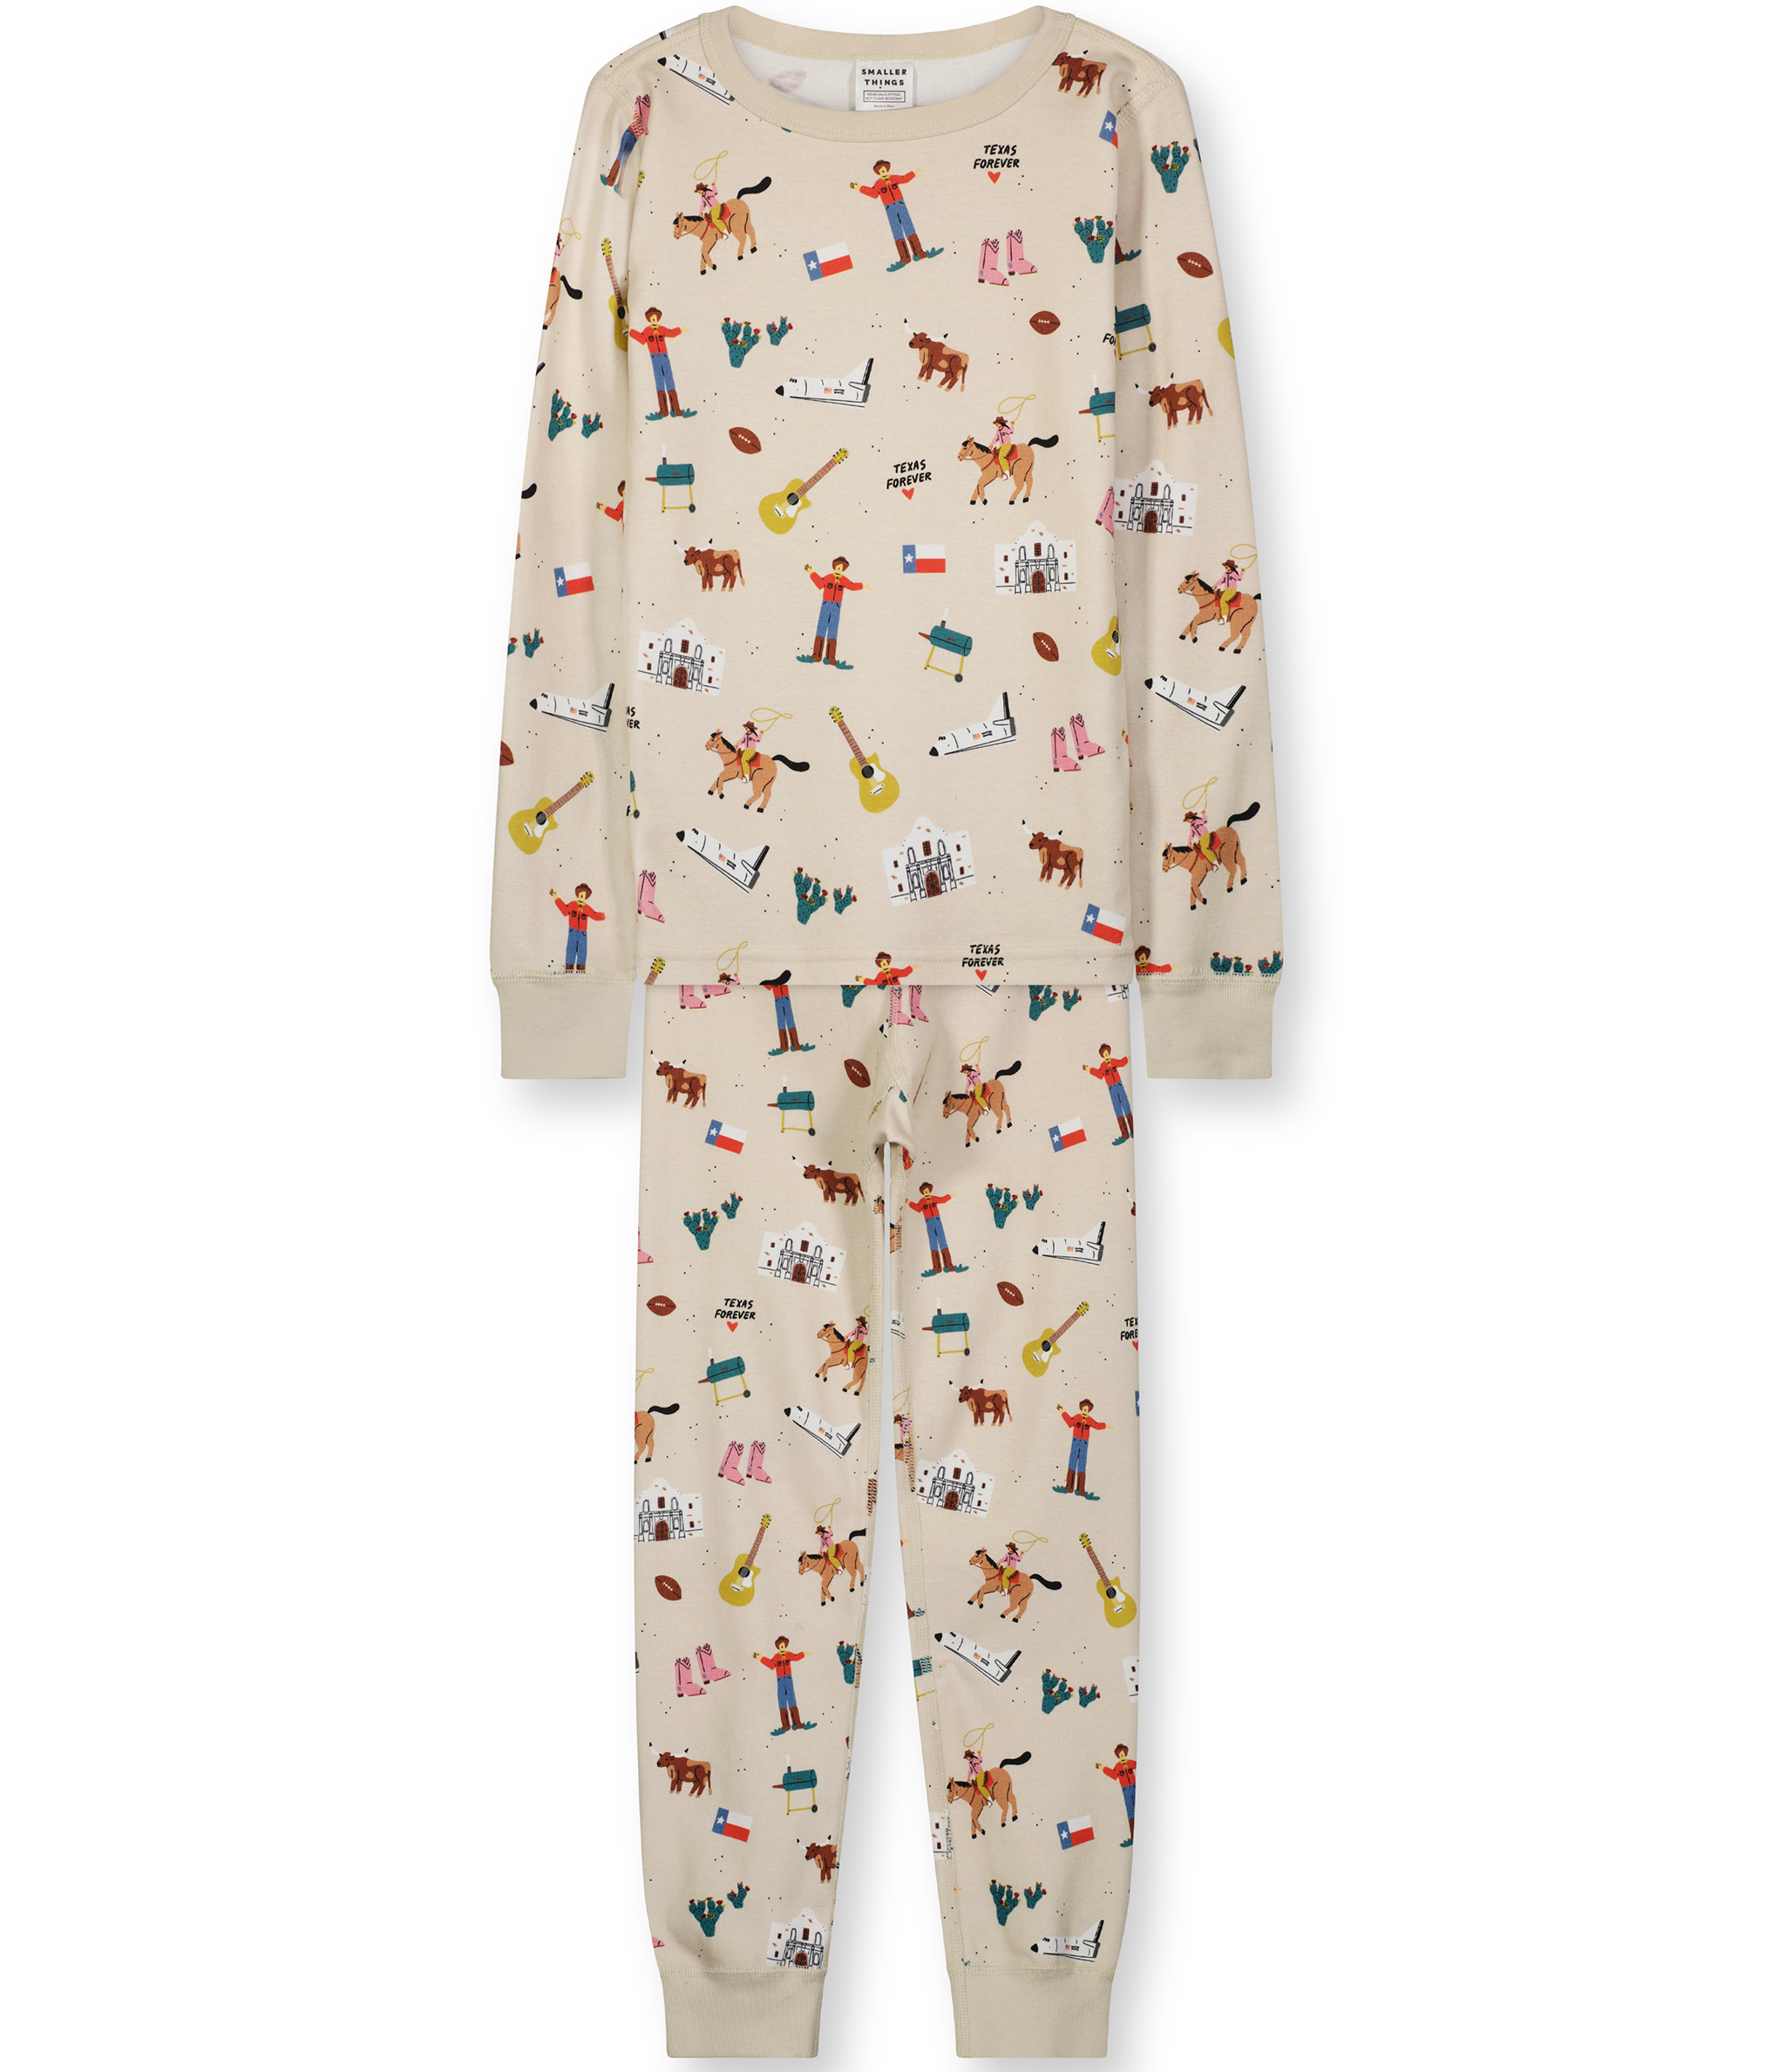 Smaller Things Goodnight, Texas.  One-of-a-kind artist illustrated pajamas set featuring all the favorite Texas icons. 100% Organic Cotton and ethically-made.